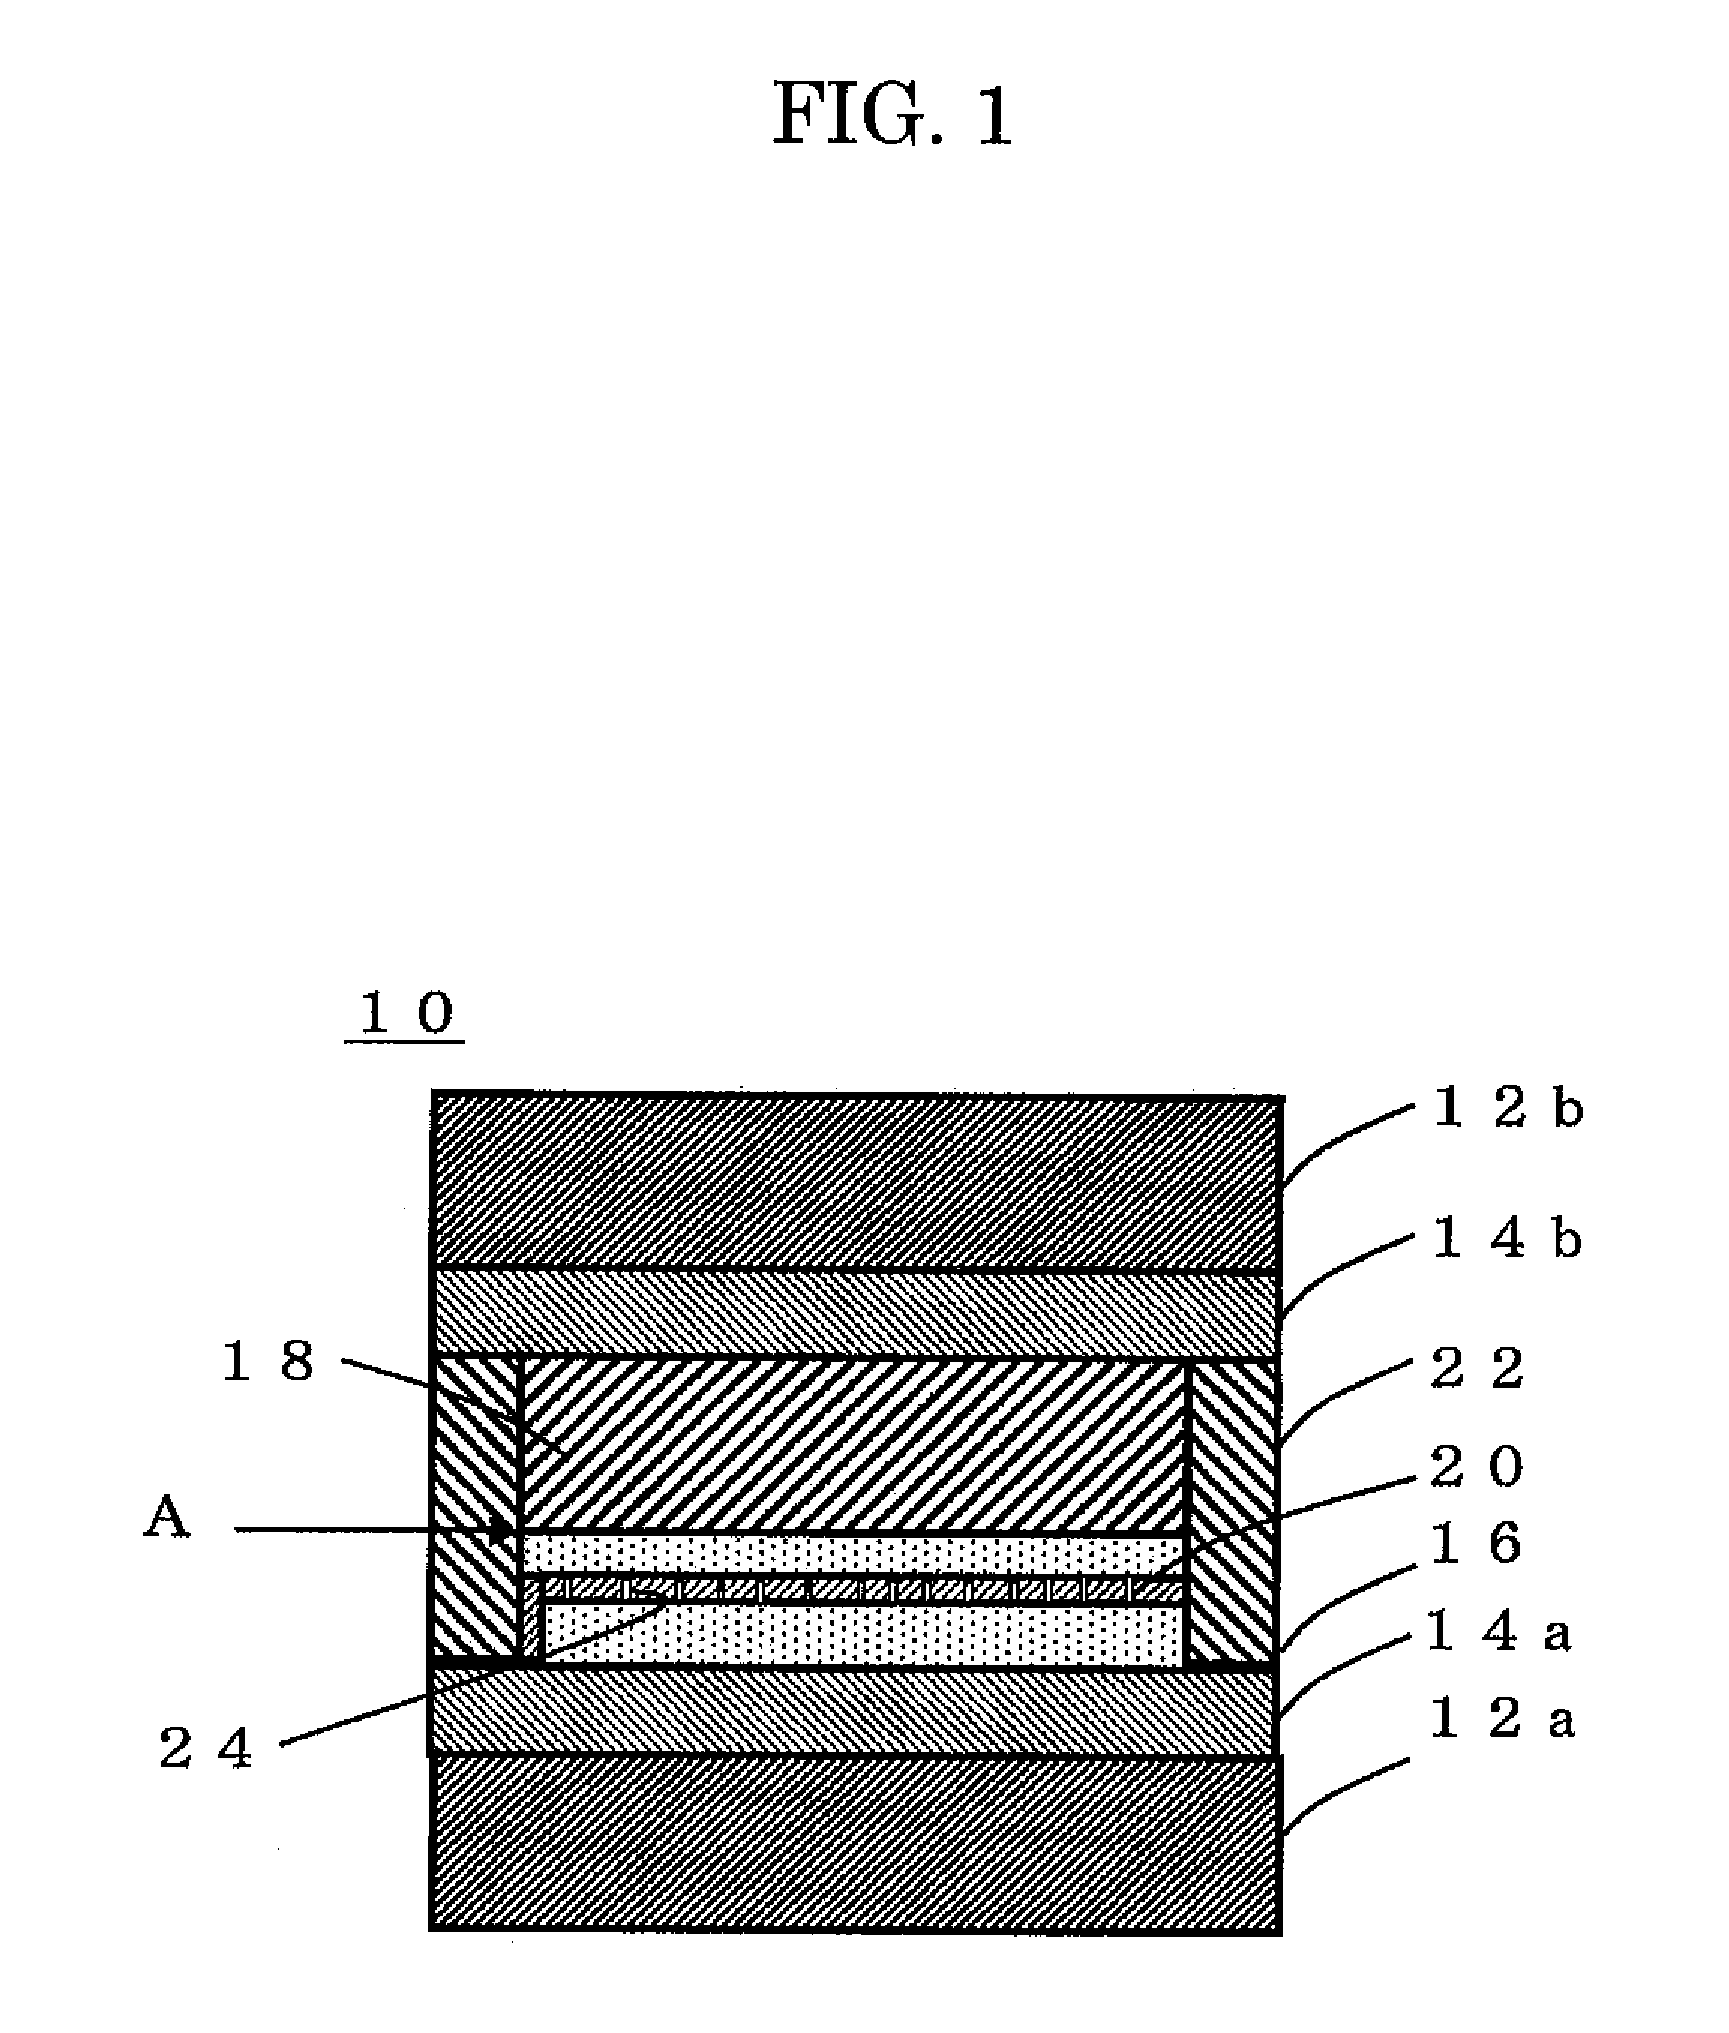 Dye-sensitized solar cell and process for producing the same